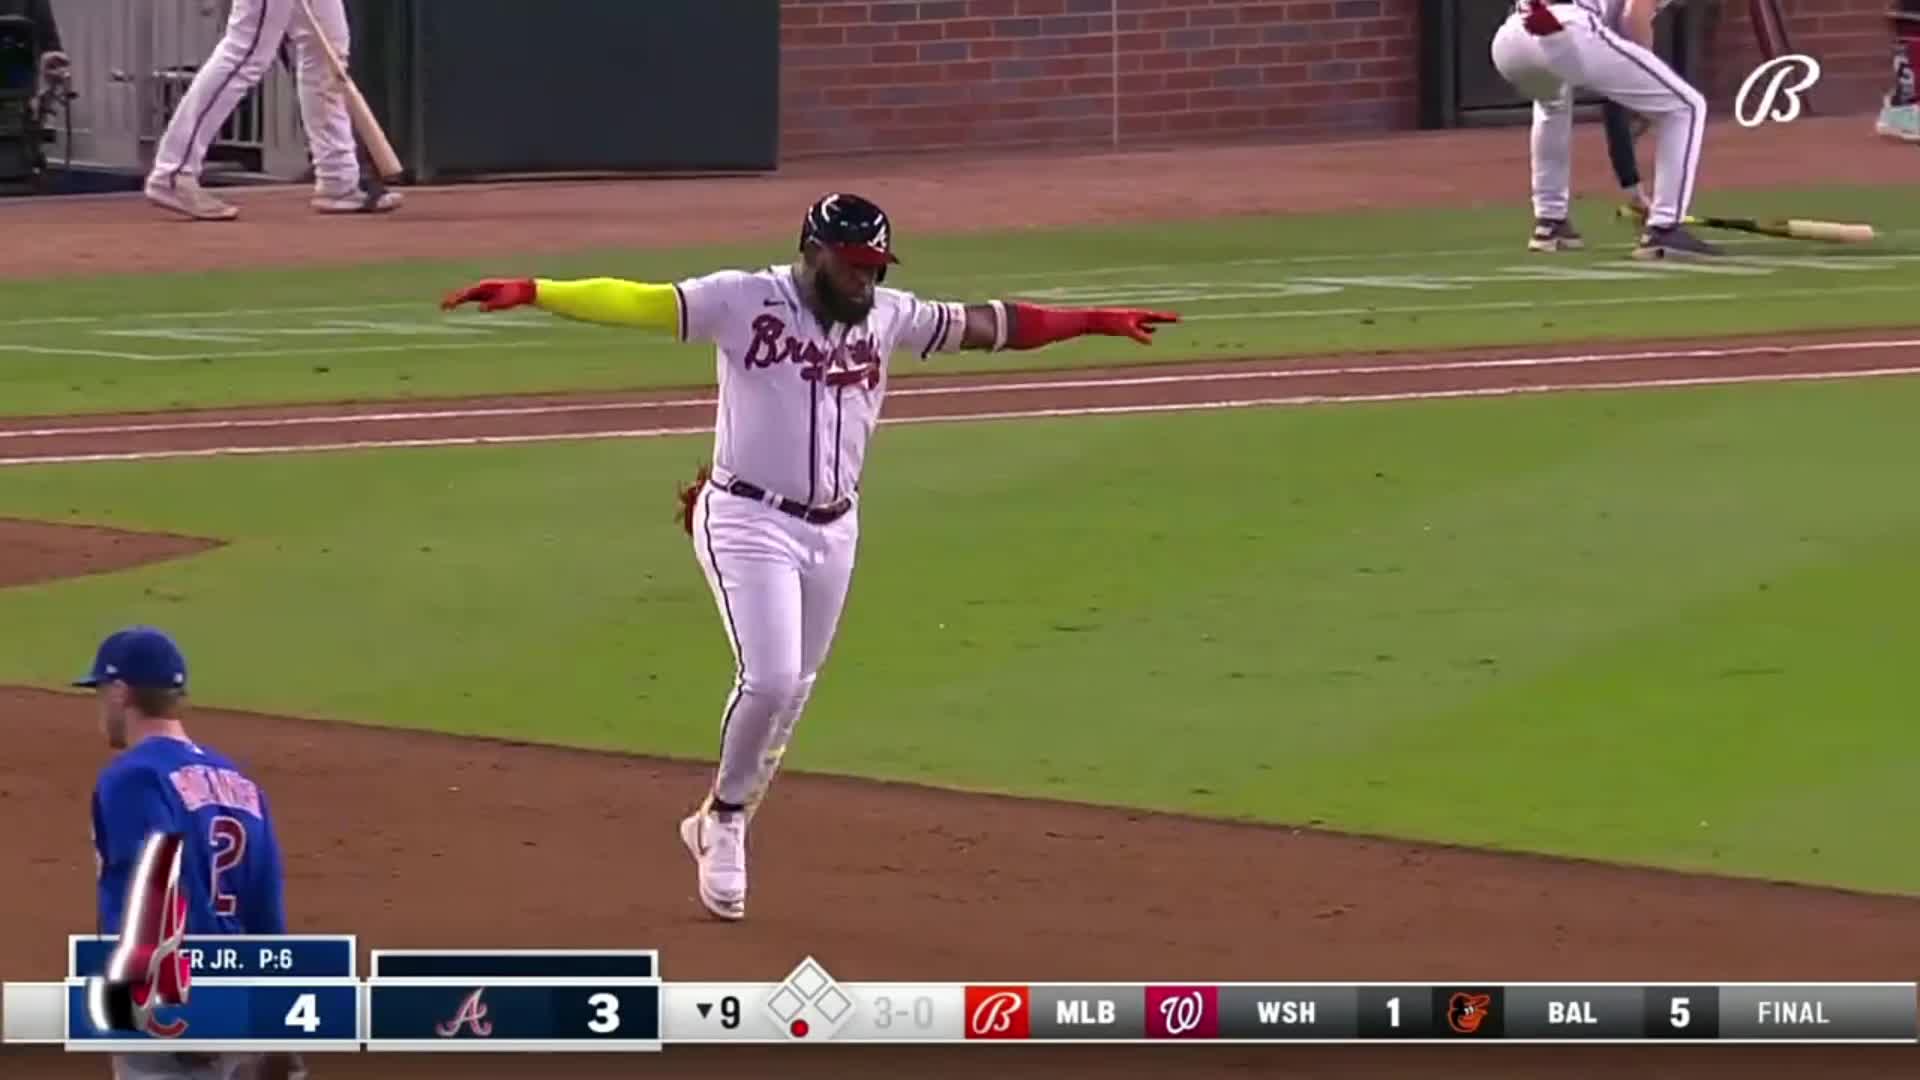 Highlight] Marcell Ozuna (from the Braves) ties the game in the